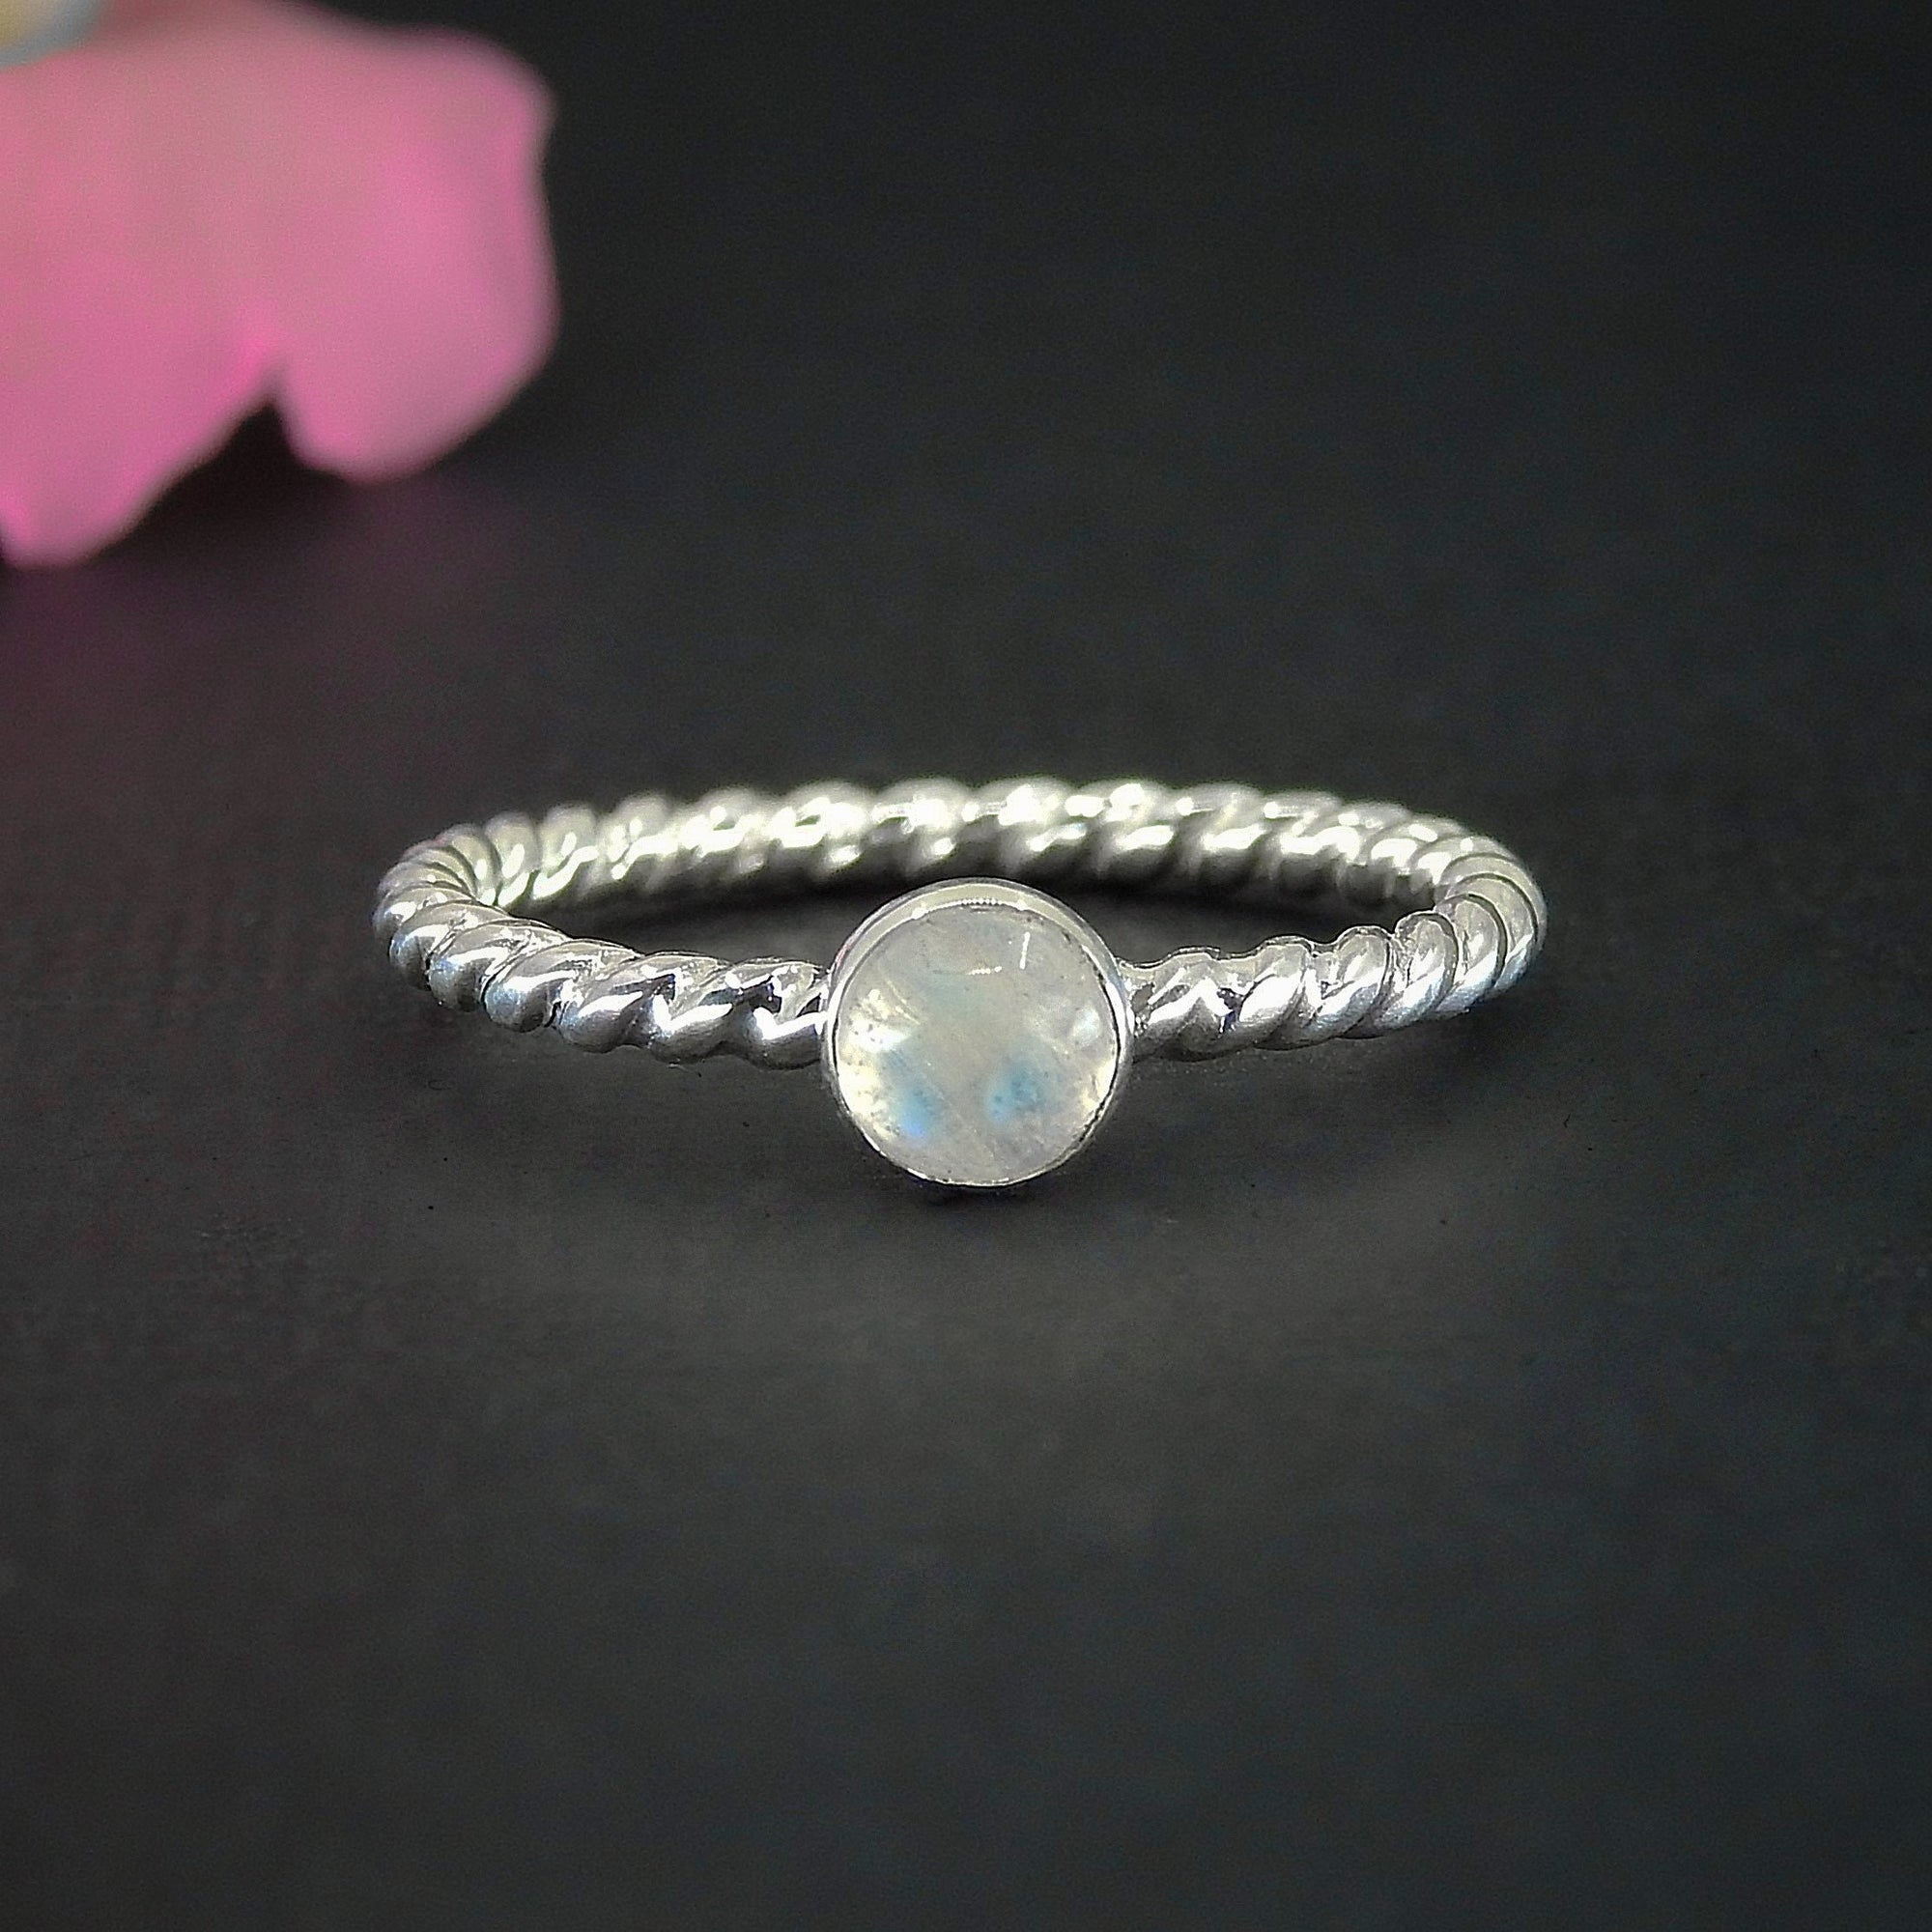 Moonstone Twist Ring - Made to Order 